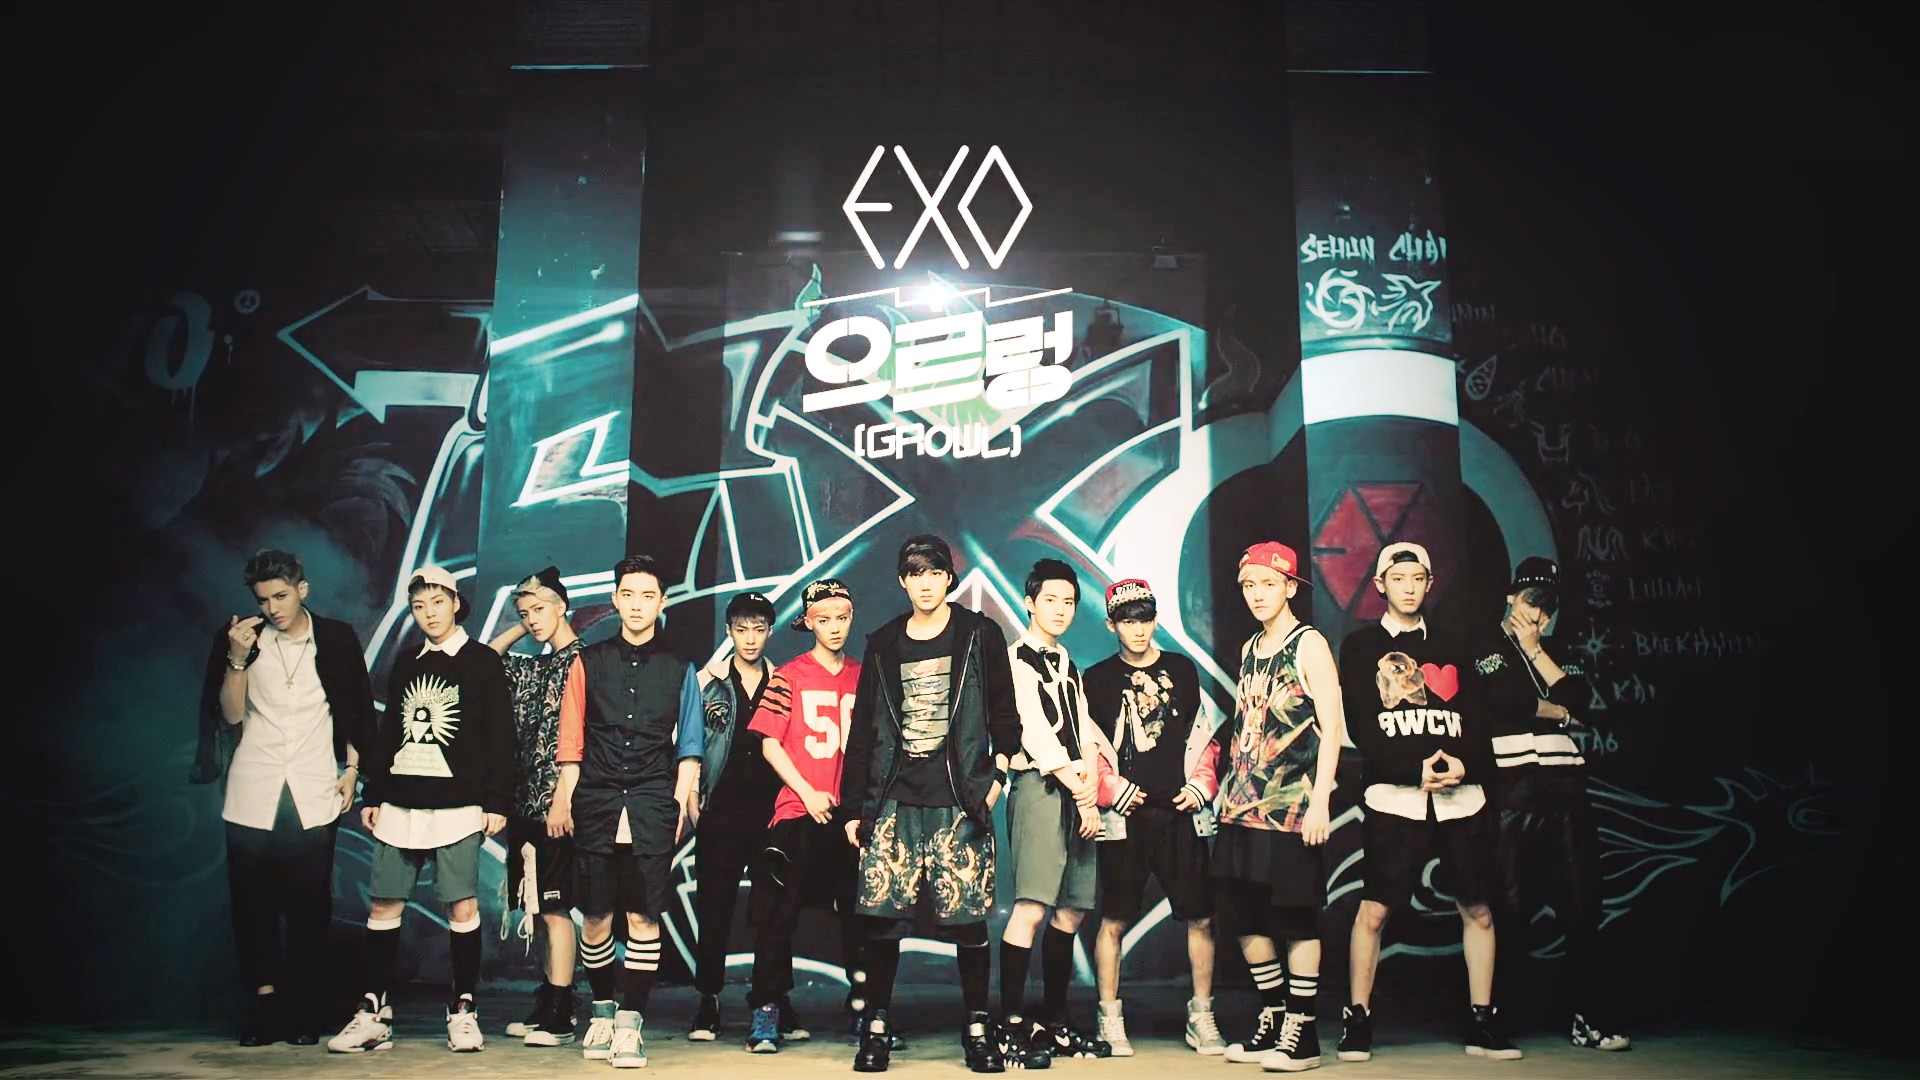  Exo  wallpaper    Download free stunning wallpapers  for 